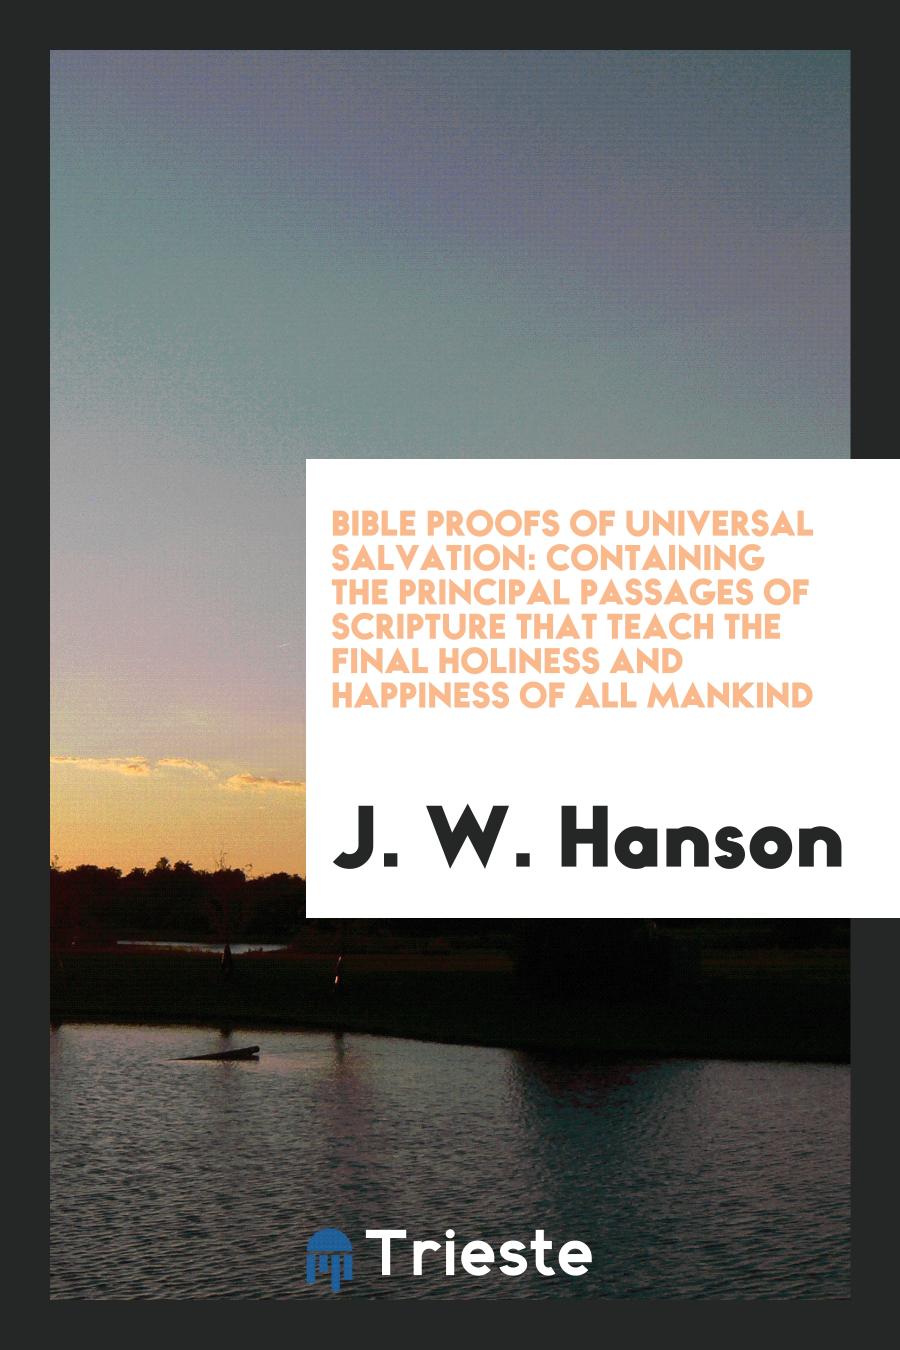 Bible Proofs of Universal Salvation: Containing the Principal Passages of Scripture That Teach the Final Holiness and Happiness of All Mankind